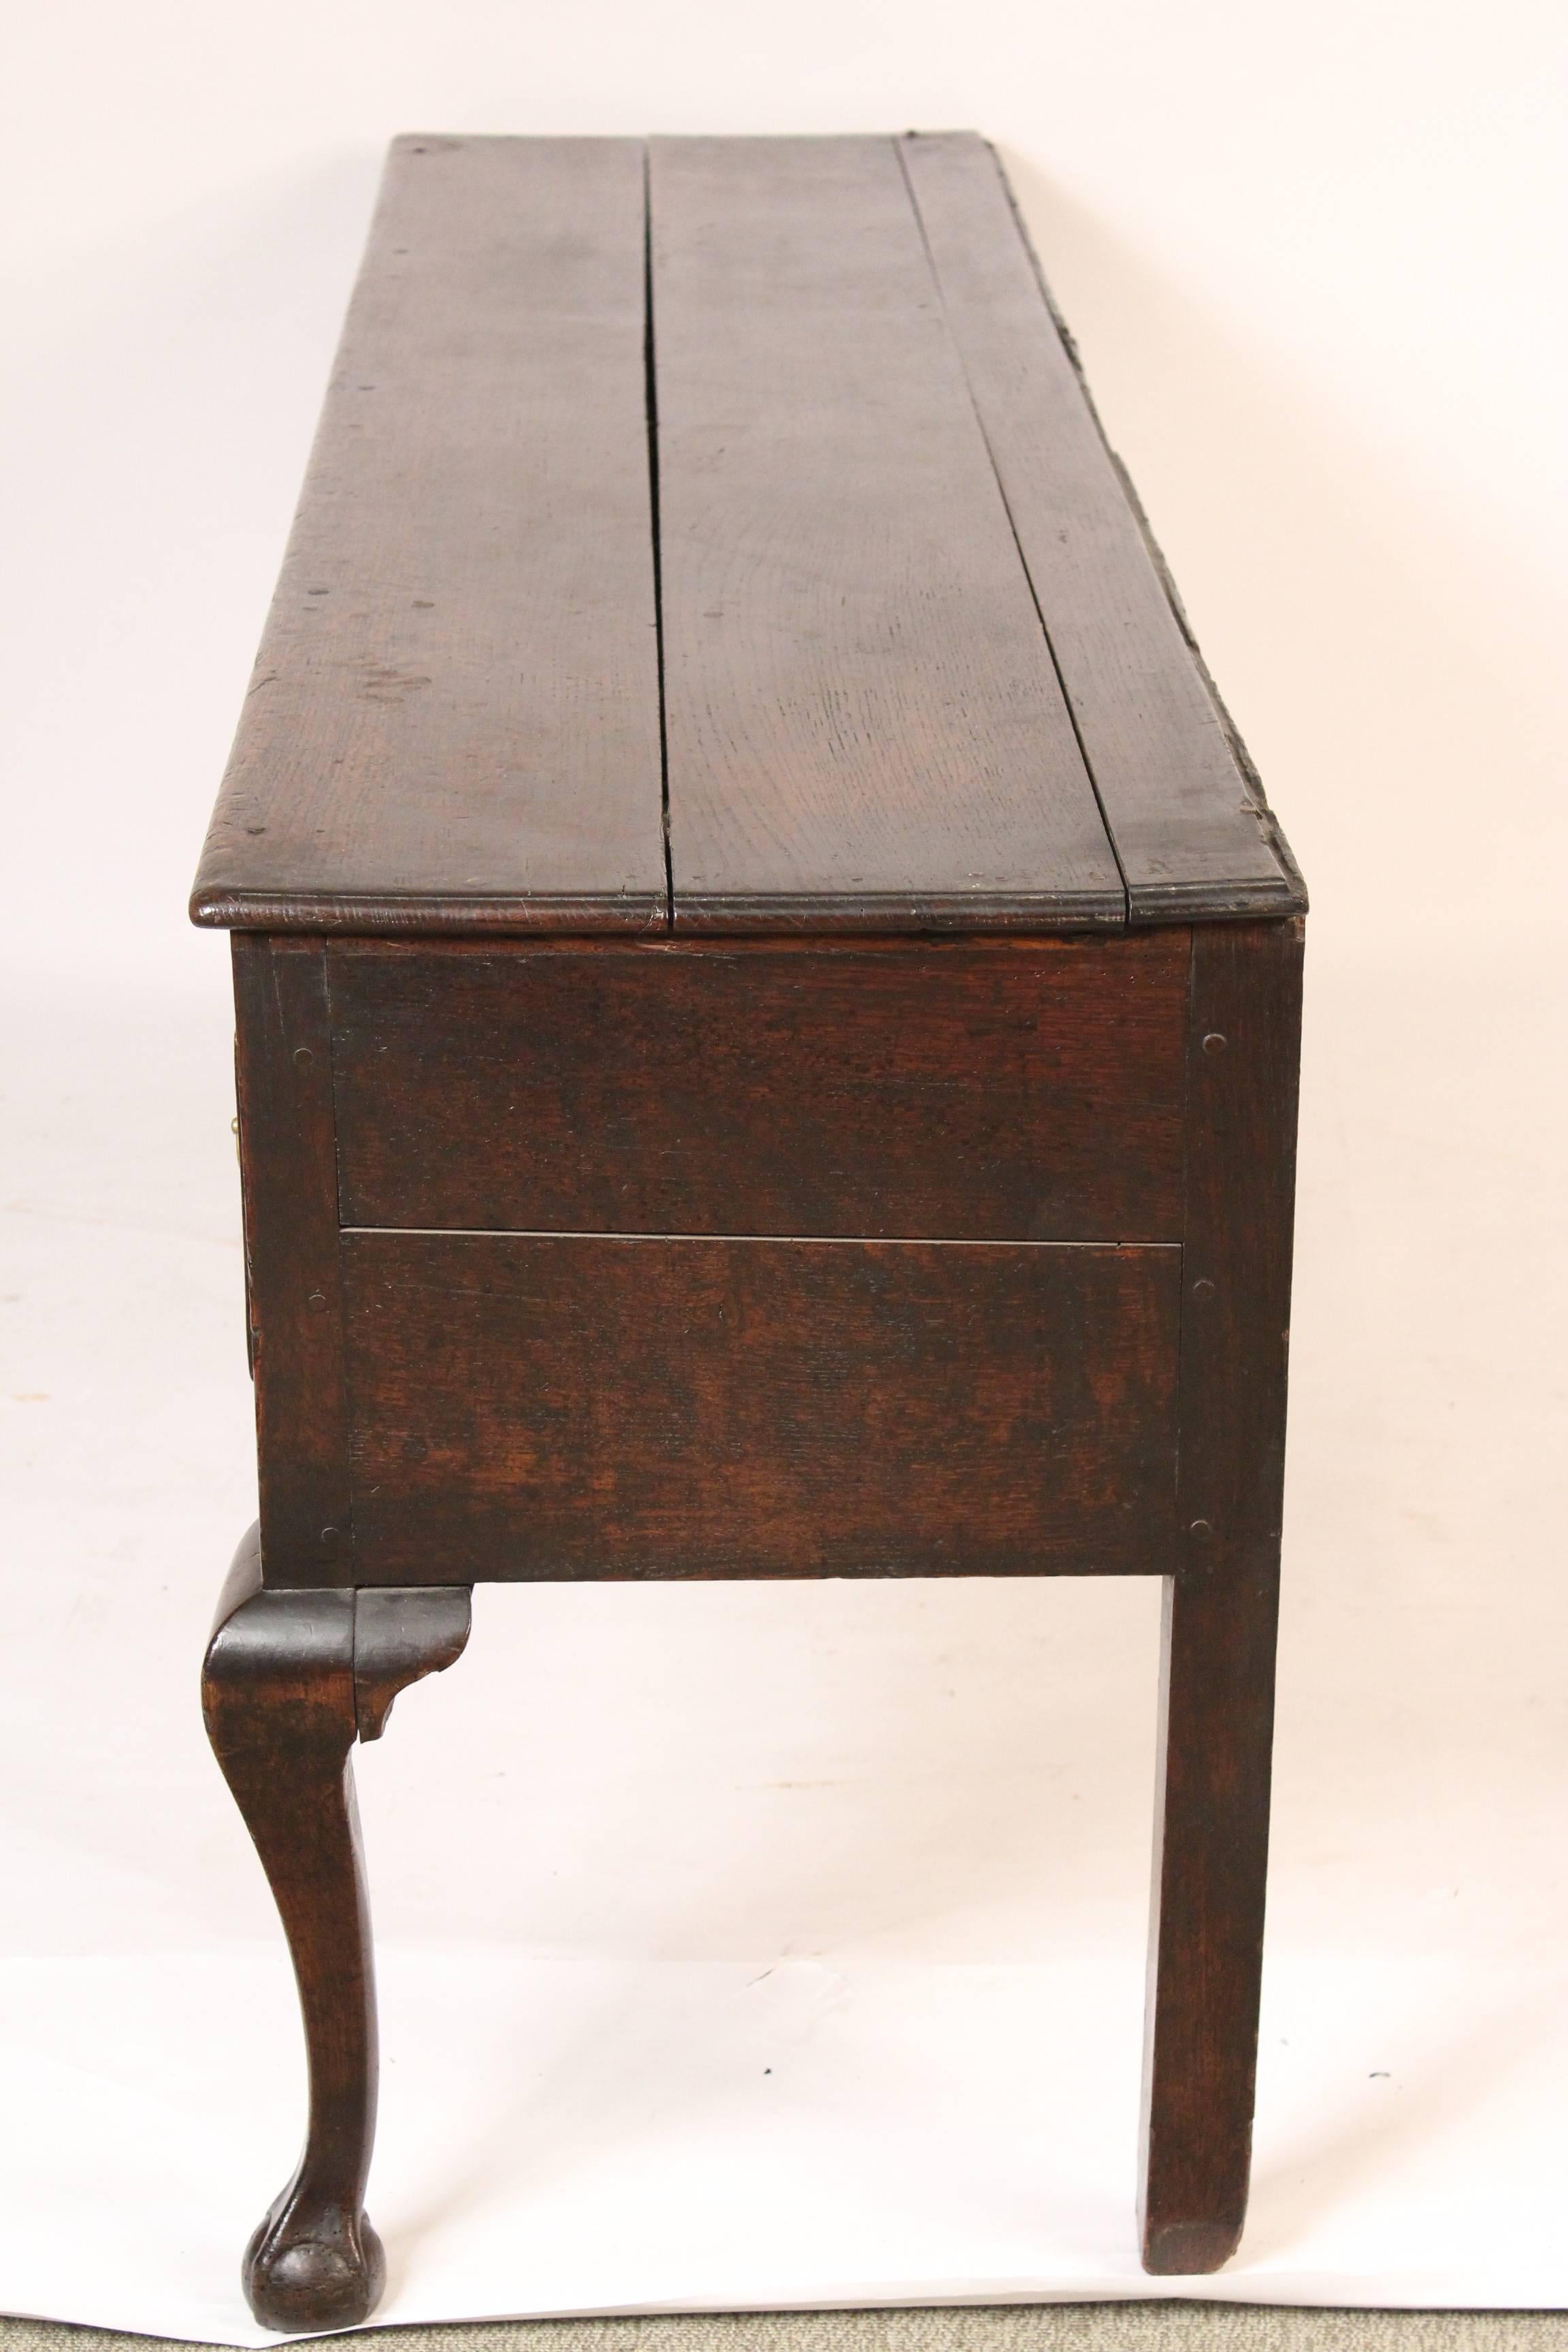 George II oak dresser base with cabriole legs and ball and claw feet, mid-18th century.